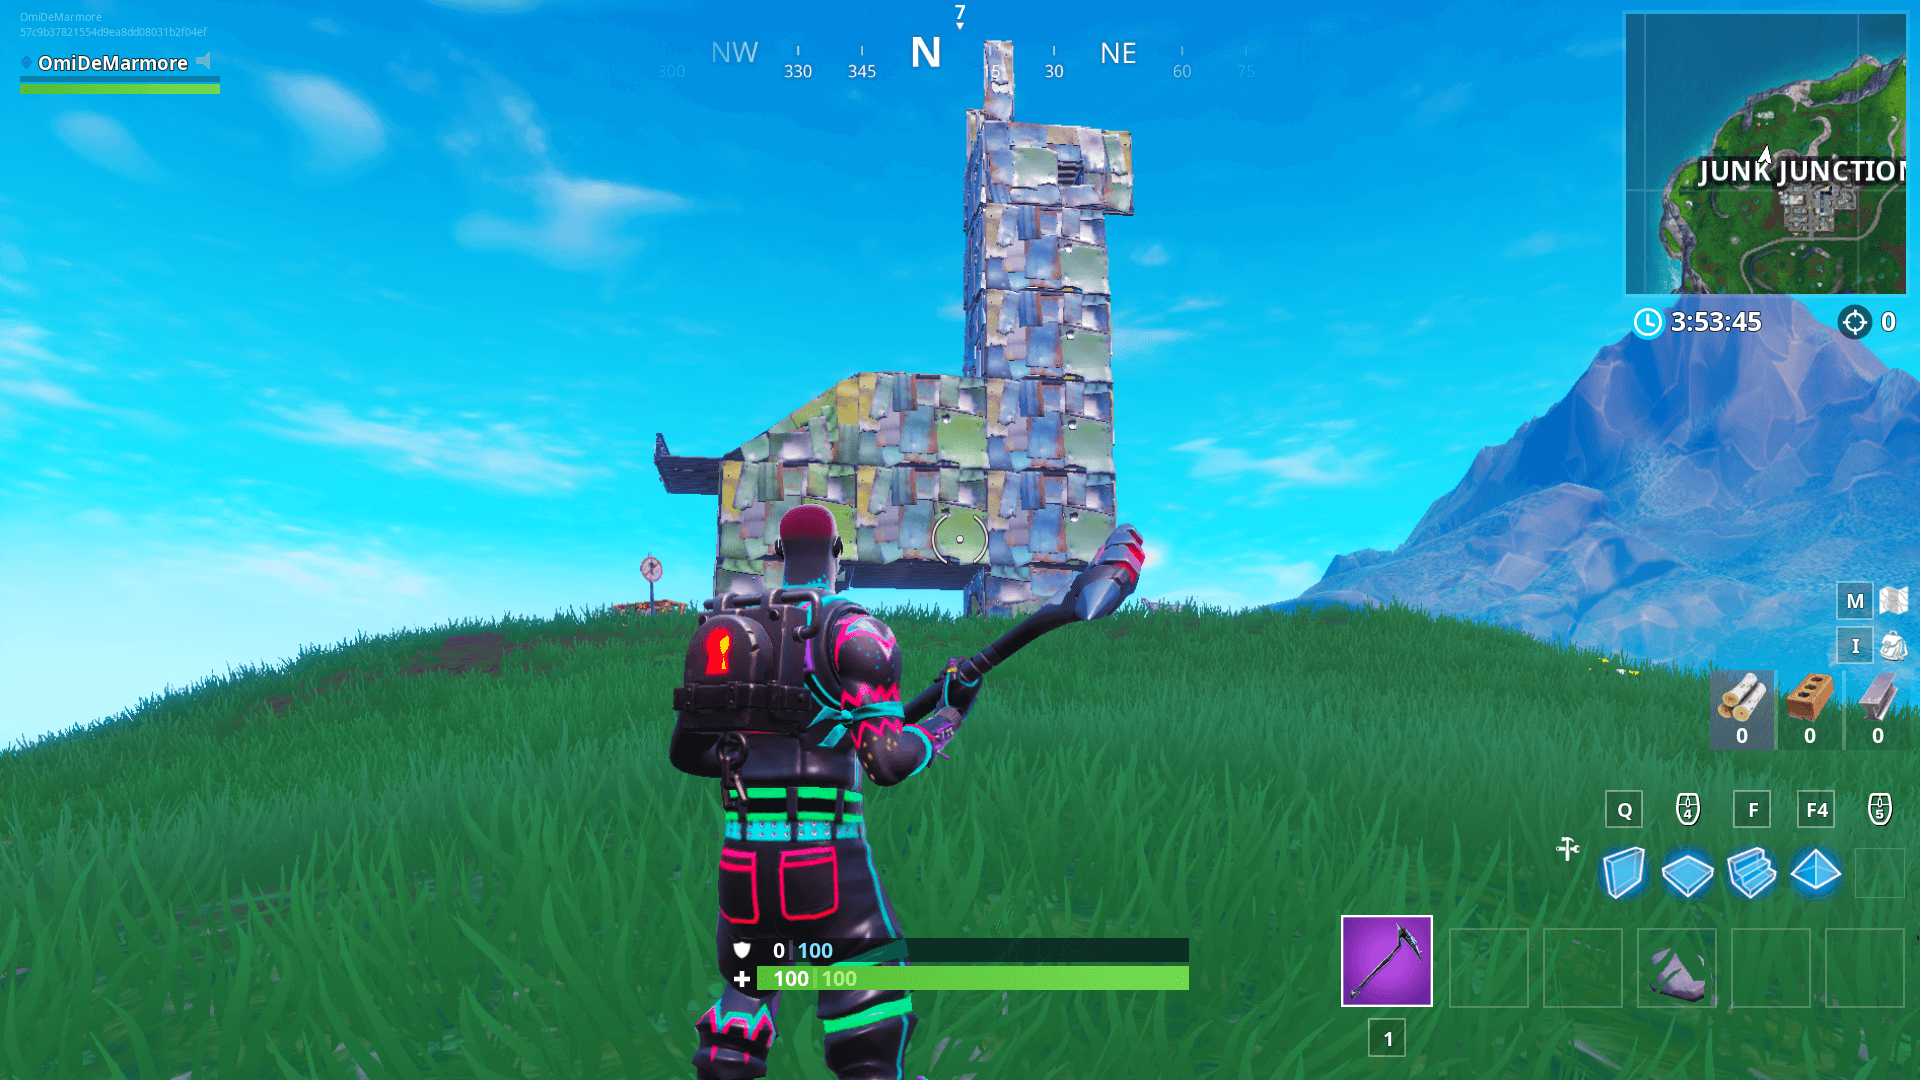 Fortni!   te Wooden Rabbit Stone Pig And Metal Llama Locations - where to find a wooden rabbit a stone pig and a metal llama in fortnite for the season 8 week 6 challenge